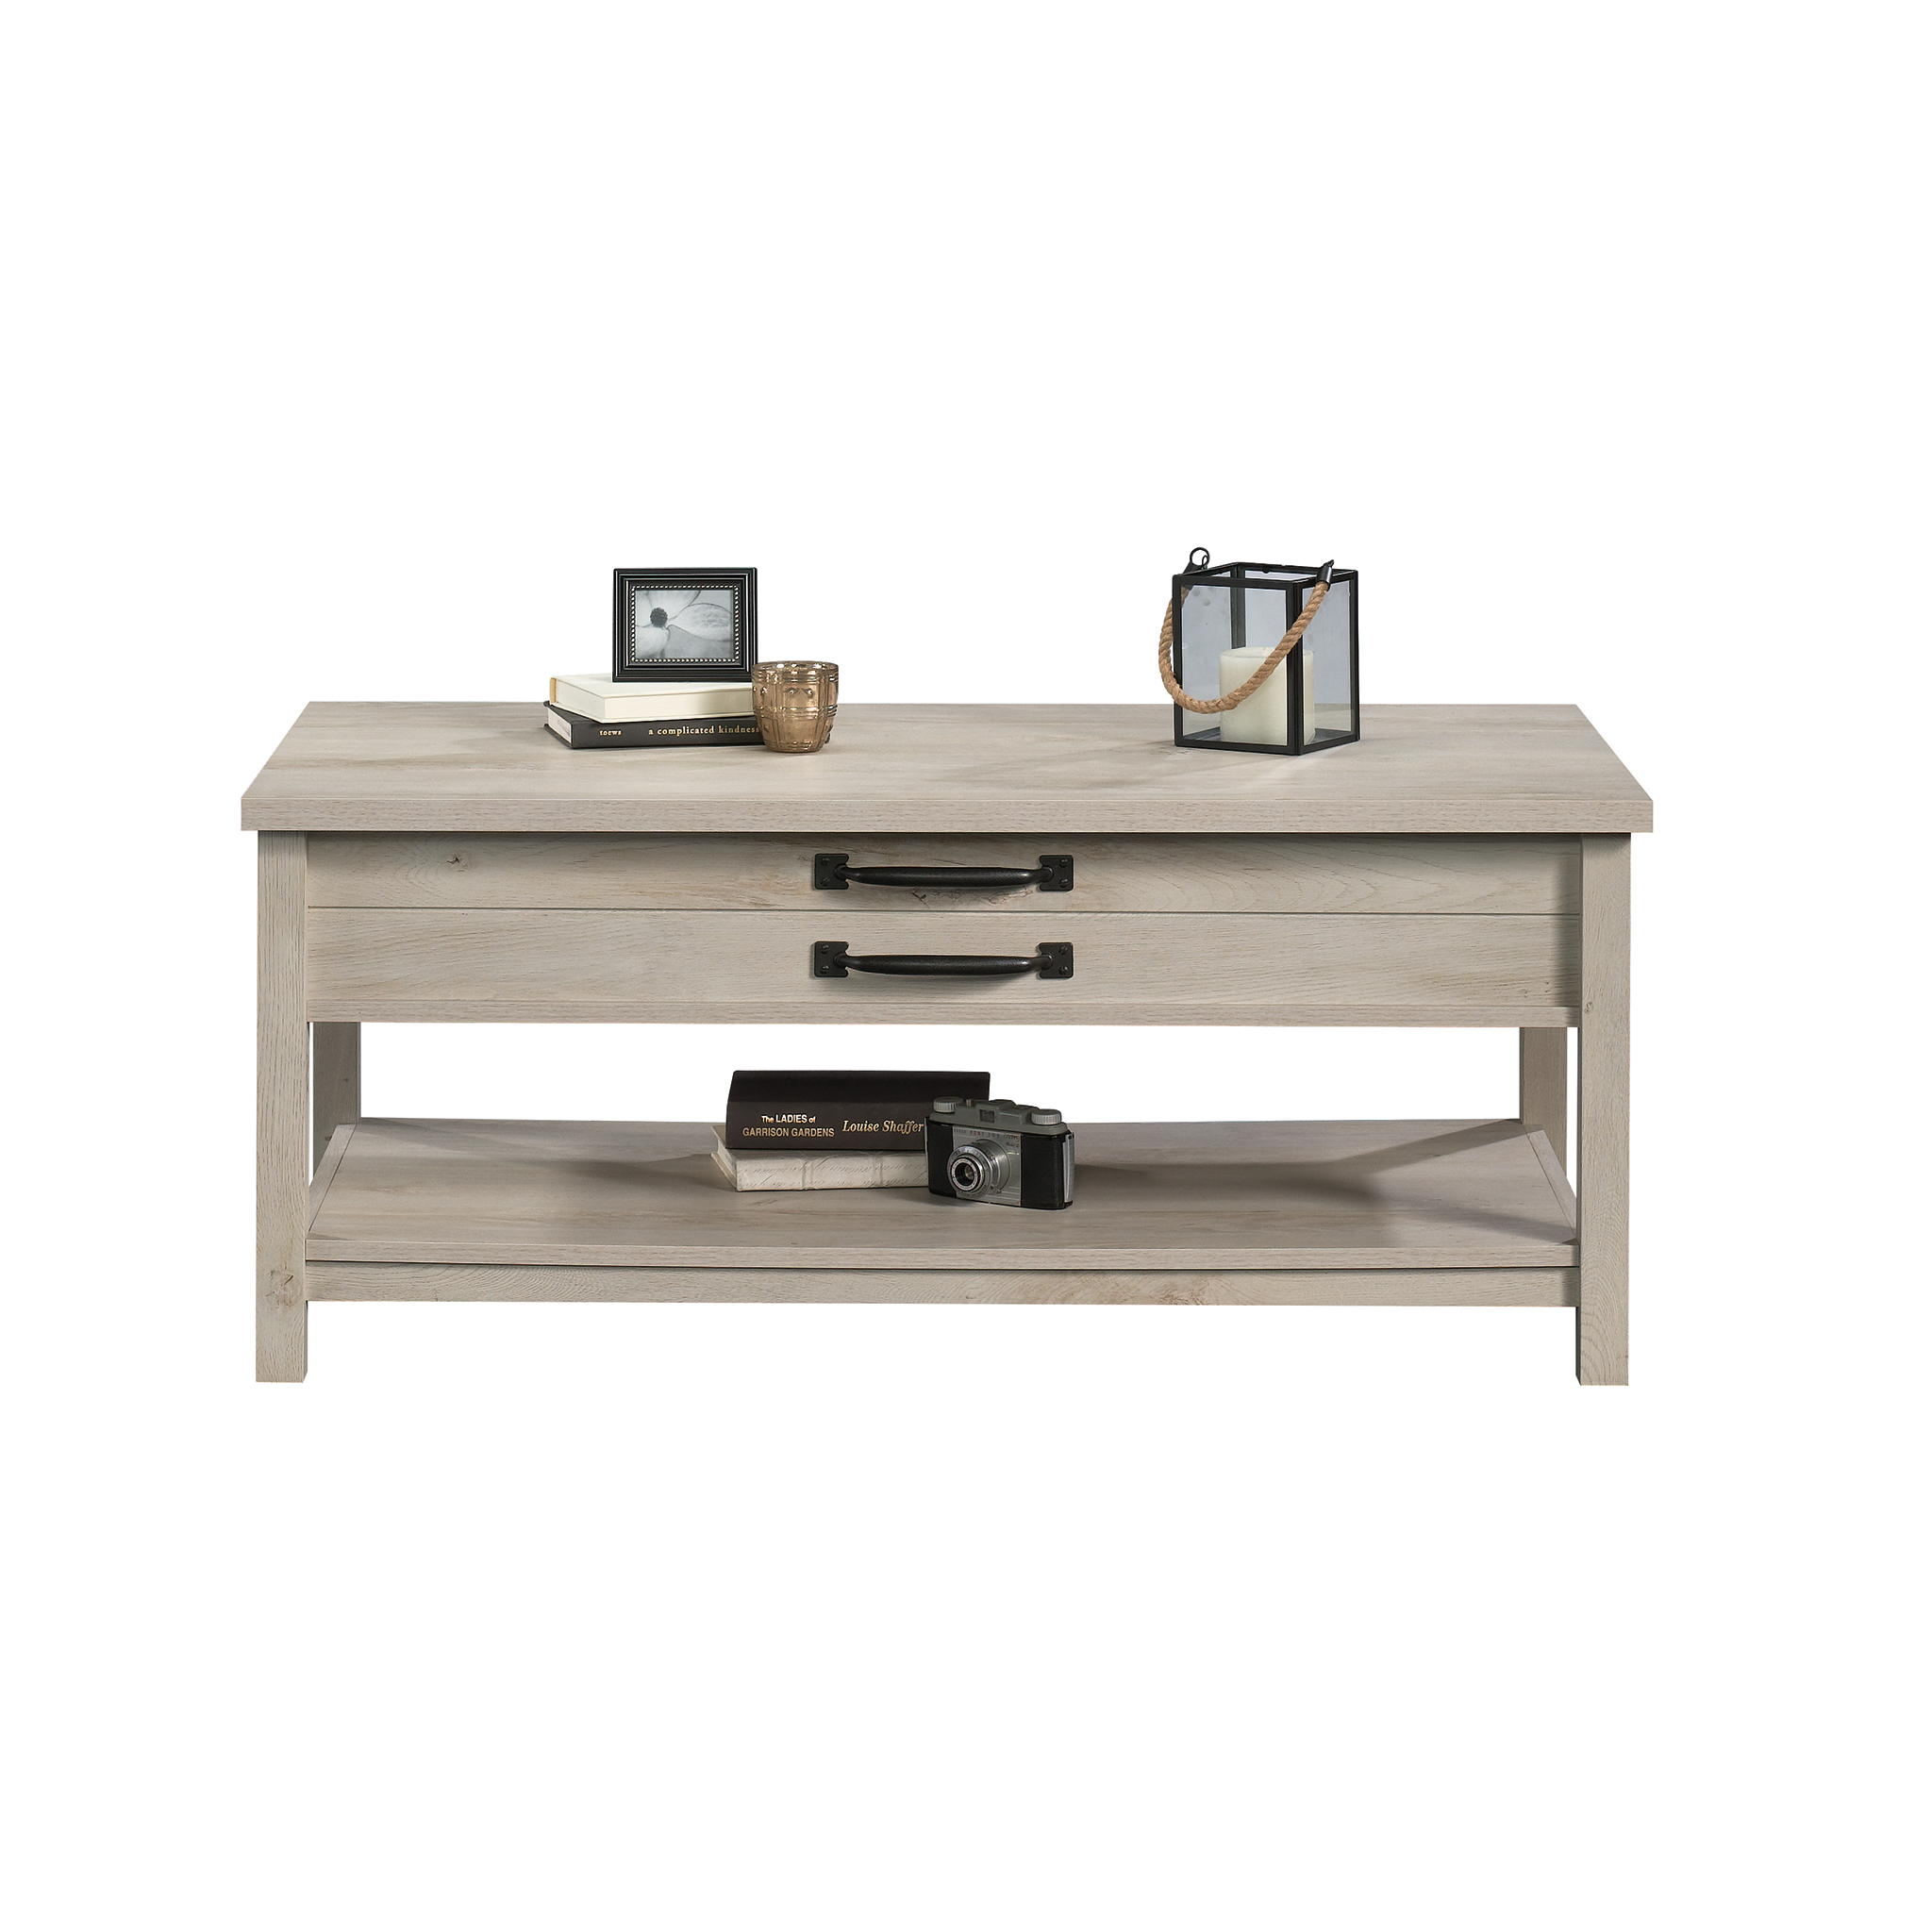 Better Homes & Gardens Modern Farmhouse Rectangle Lift Top Coffee Table, Rustic White Finish - image 2 of 16